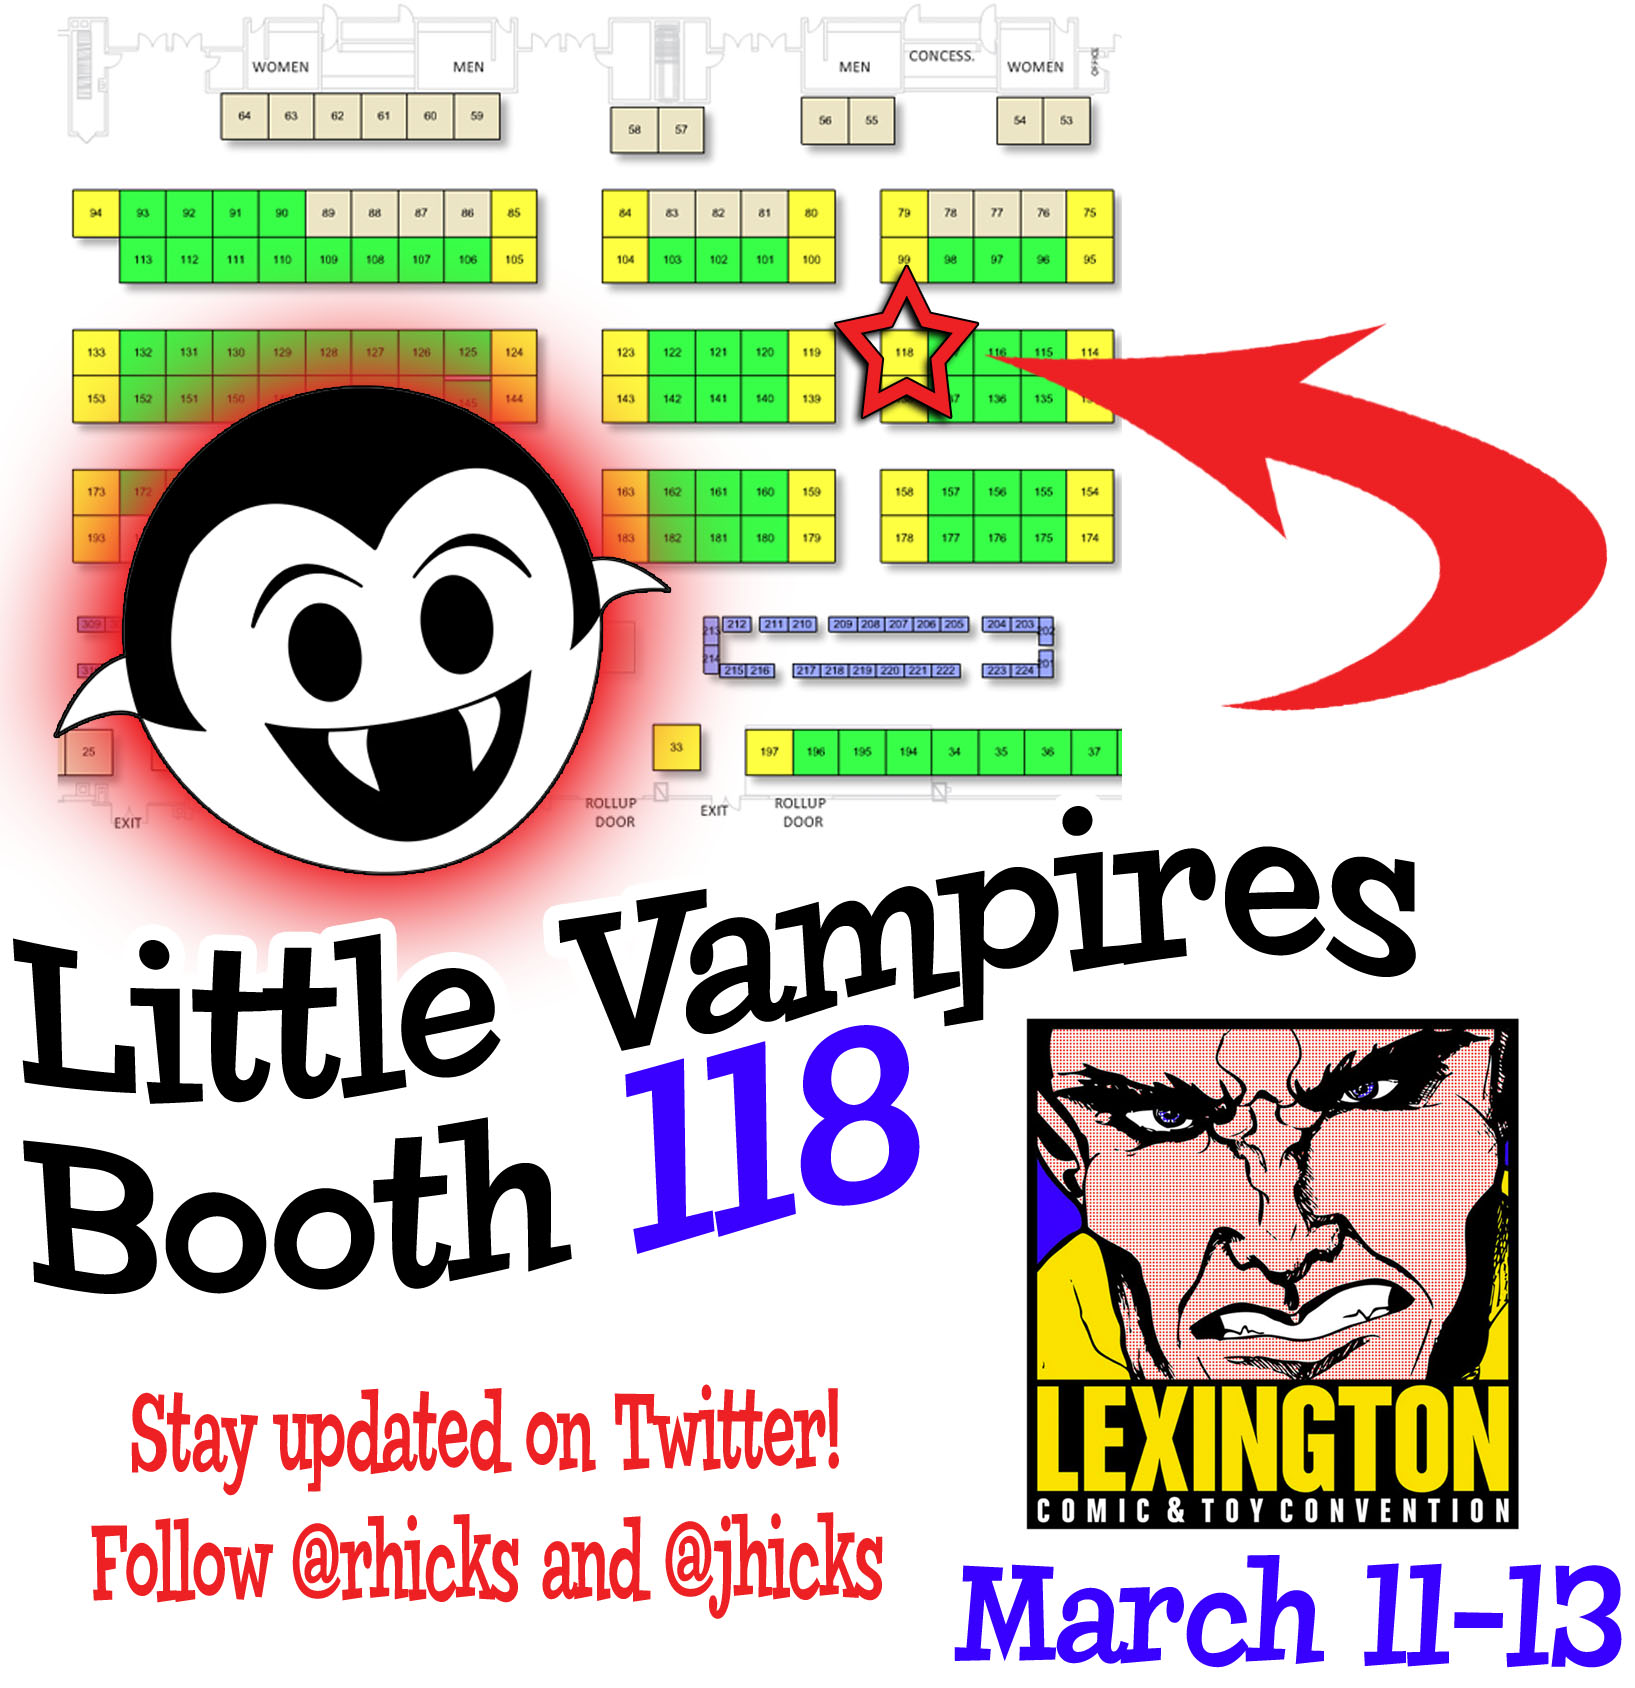 Lexington Comic and Toy Convention 2016 exhibitor floor map with the Little Vampires booth highlighted